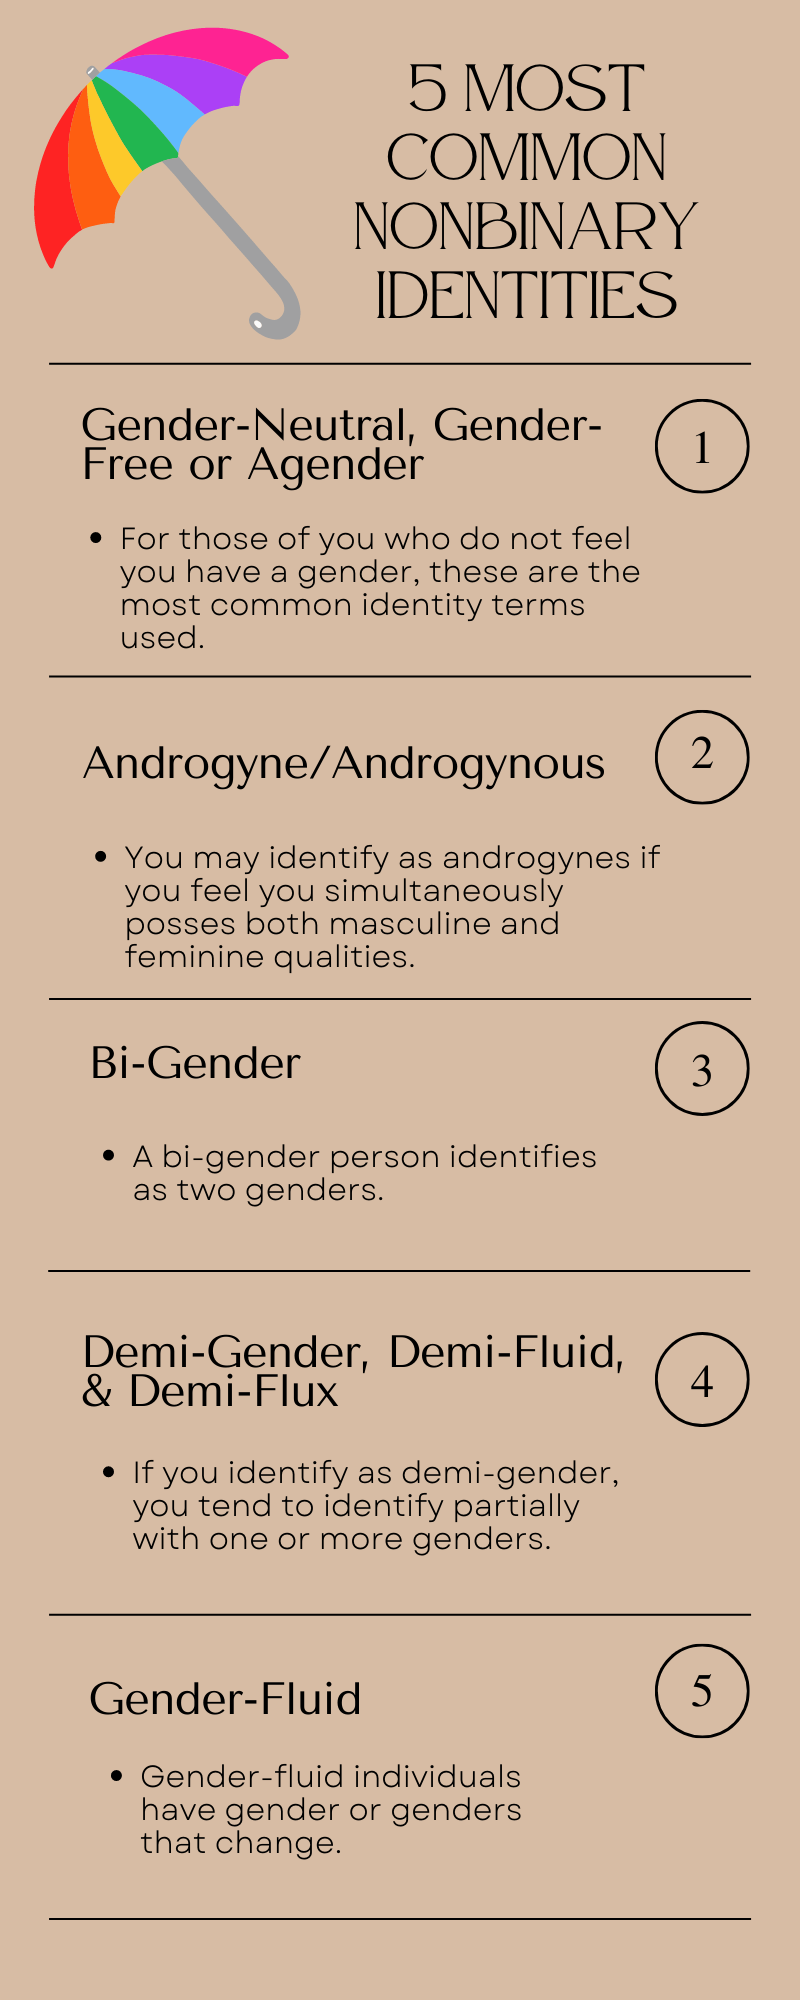 Non-binary vs. Gender Fluid: What's the Difference? — DR Z PHD